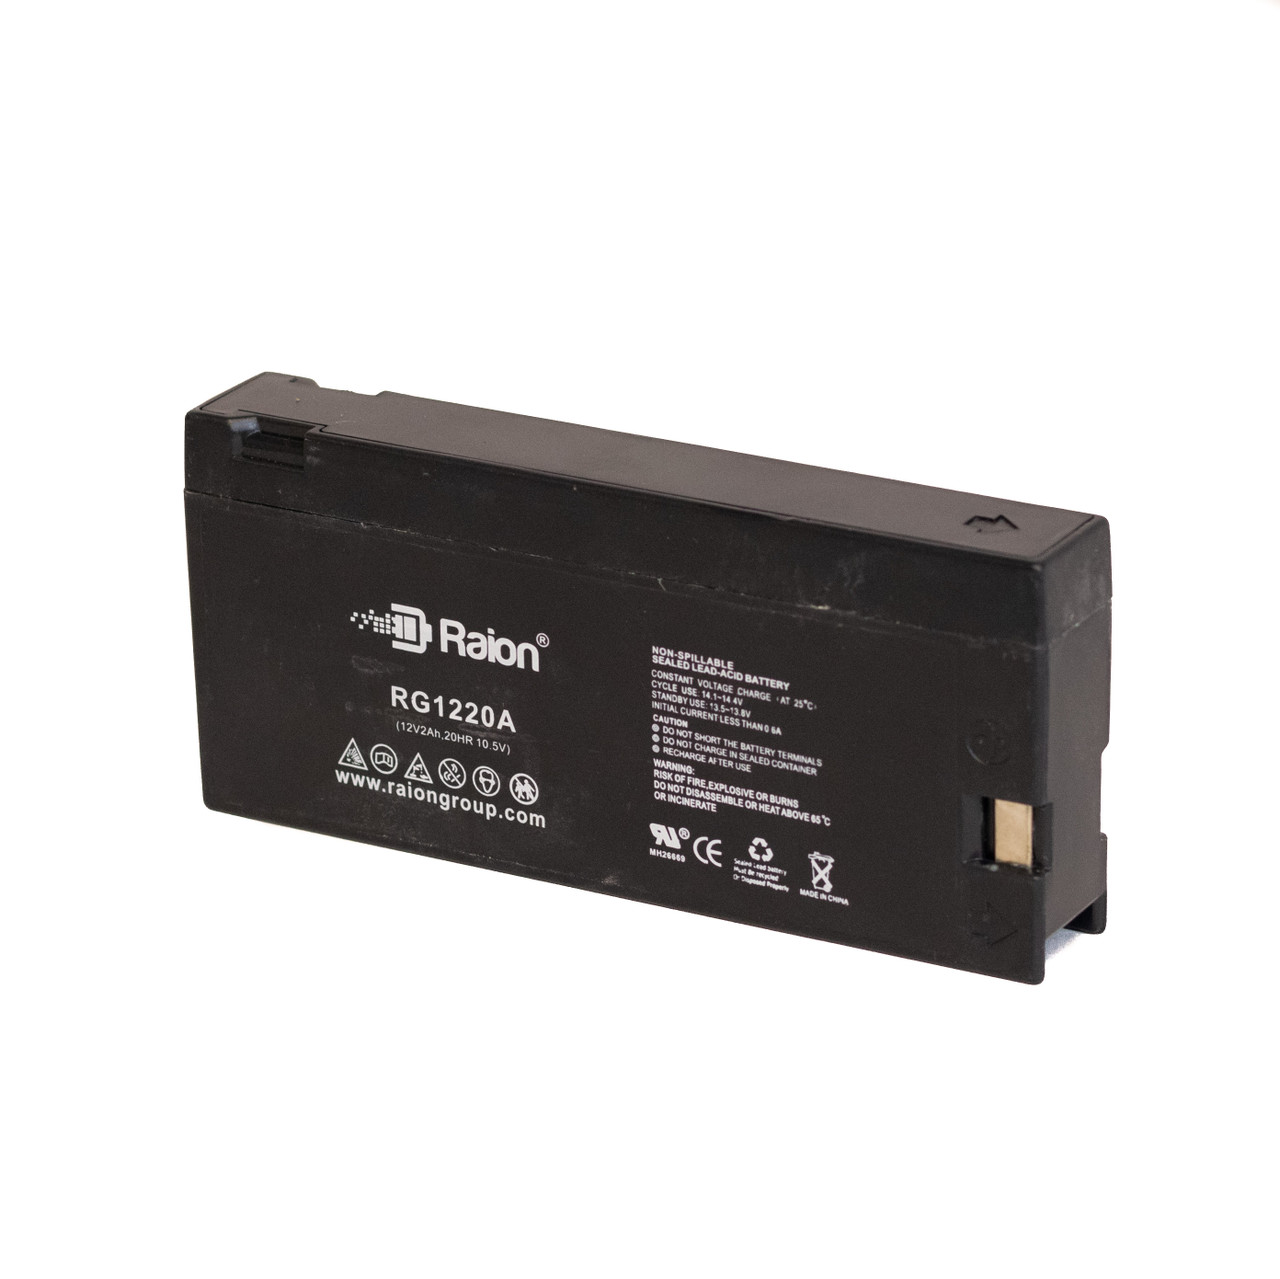 Raion Power RG1220A Replacement Battery for Magnavox CVM-315